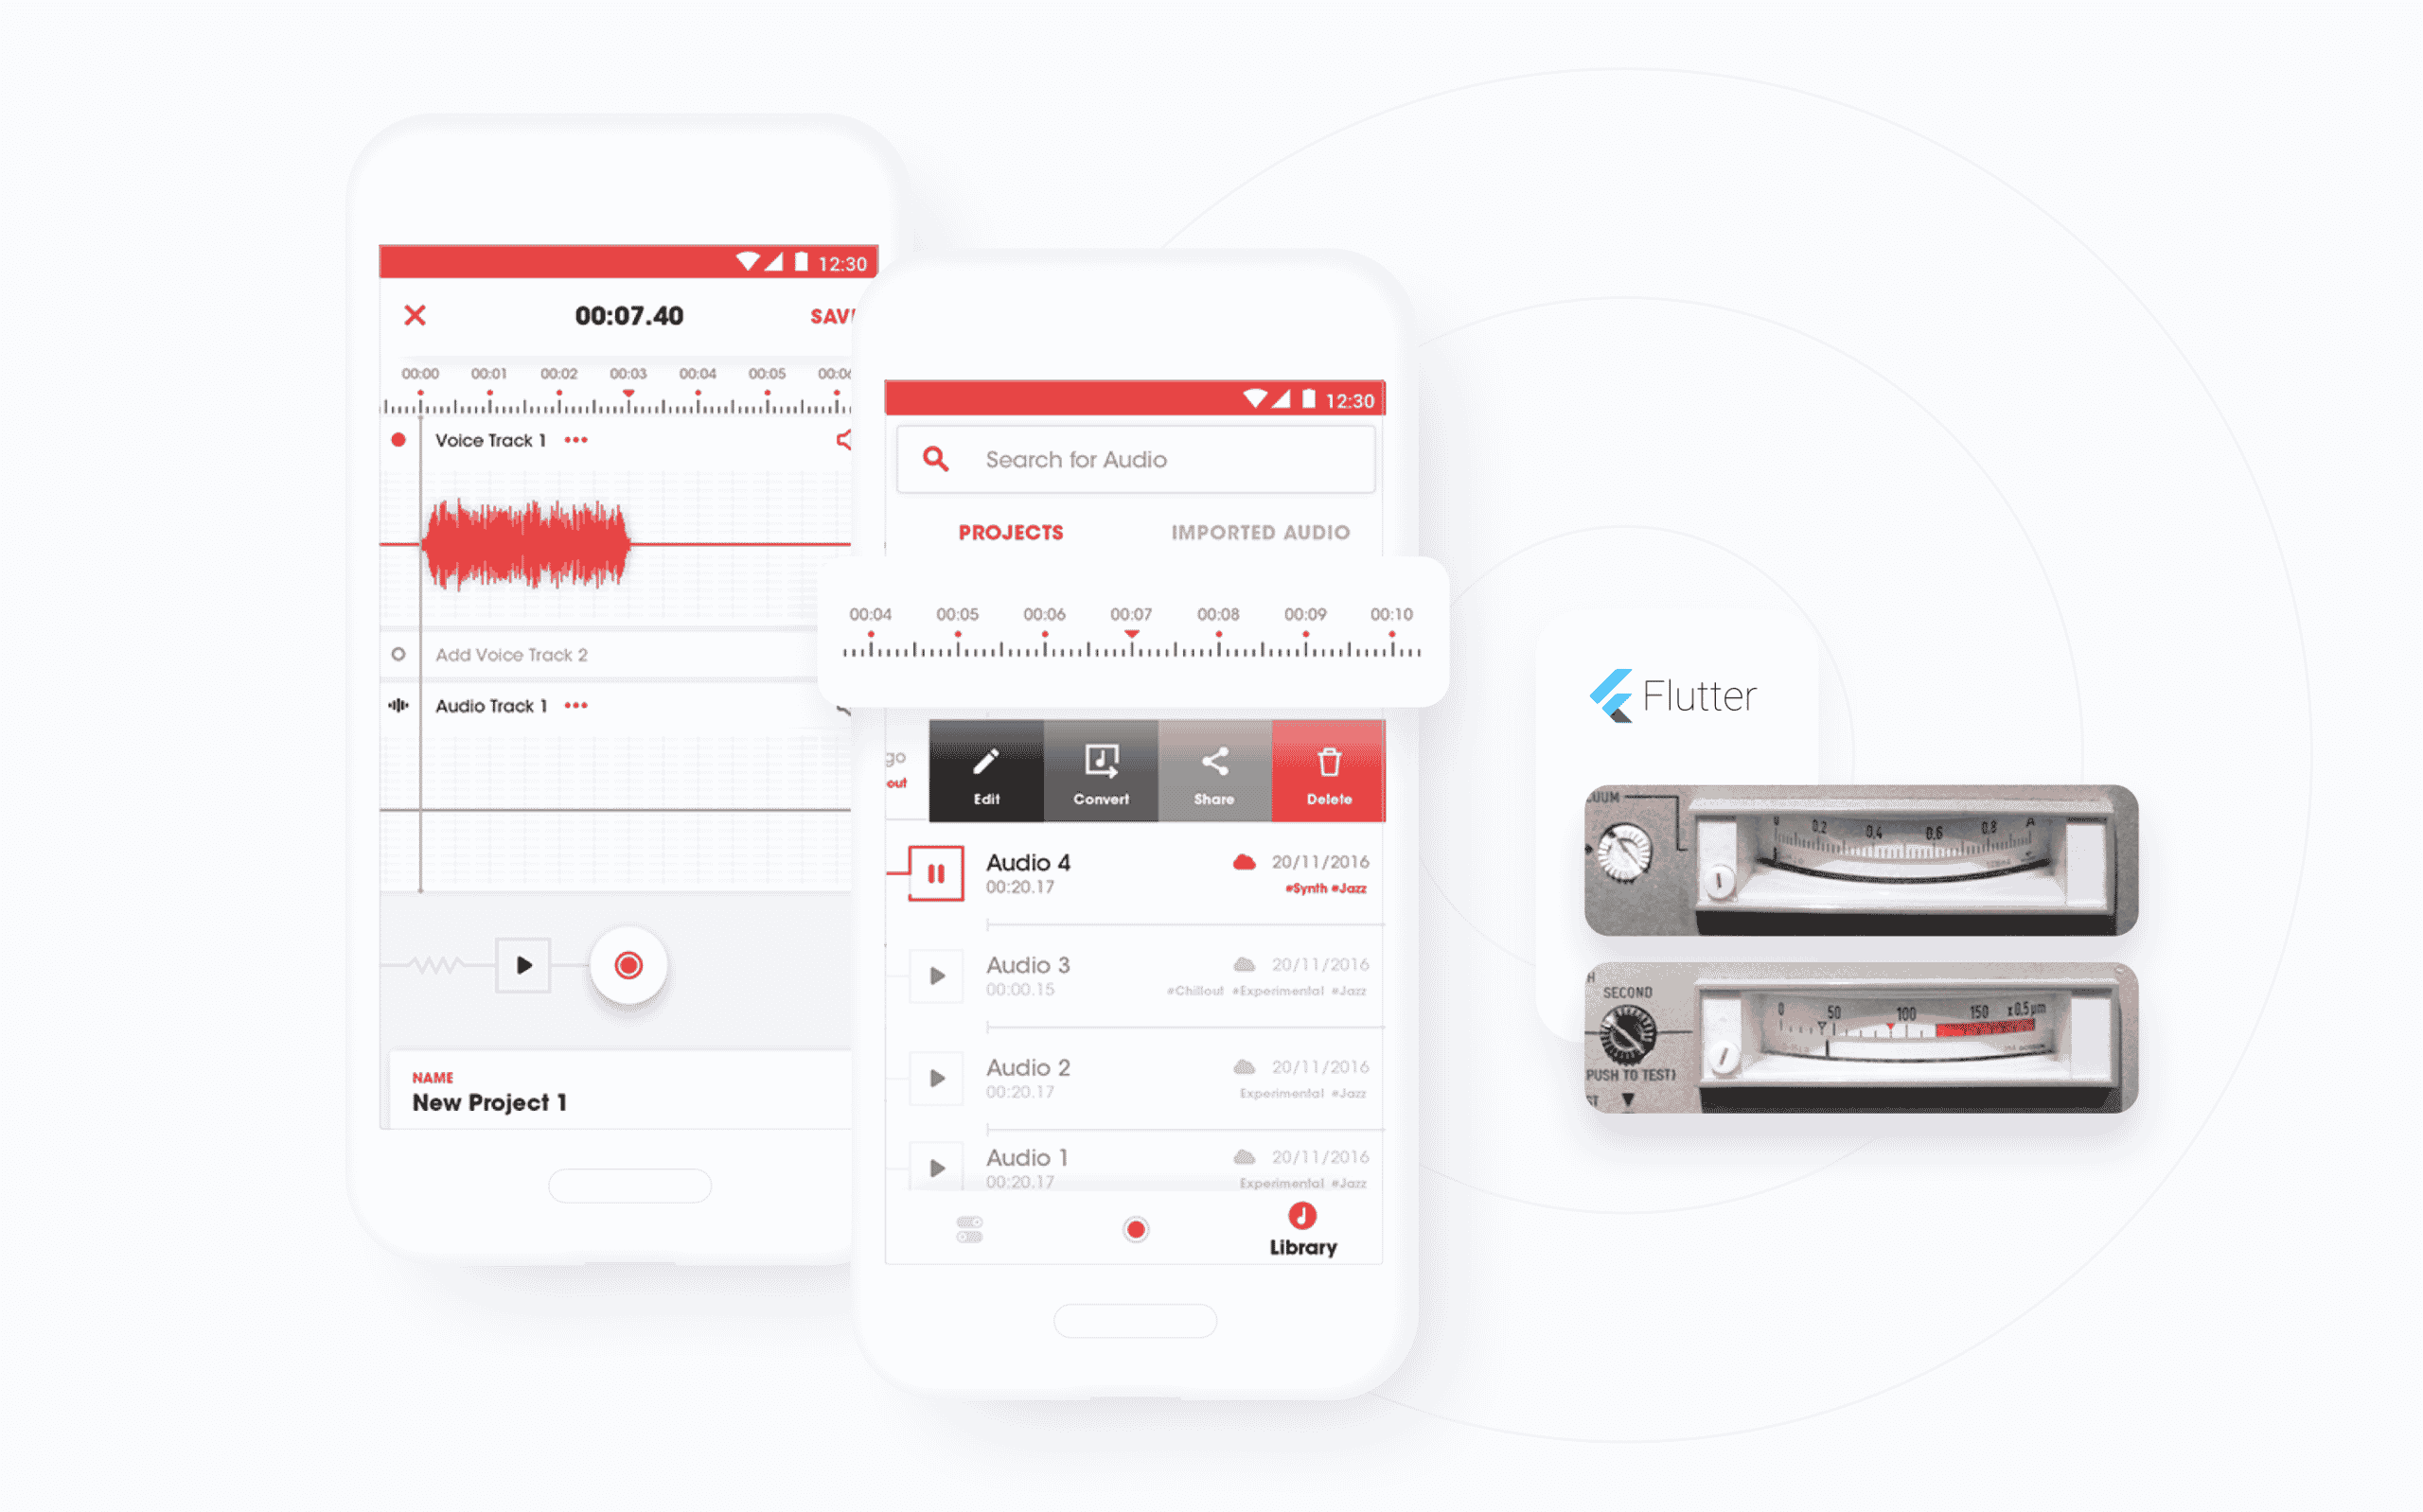 App interface of Topline - a songwriting app